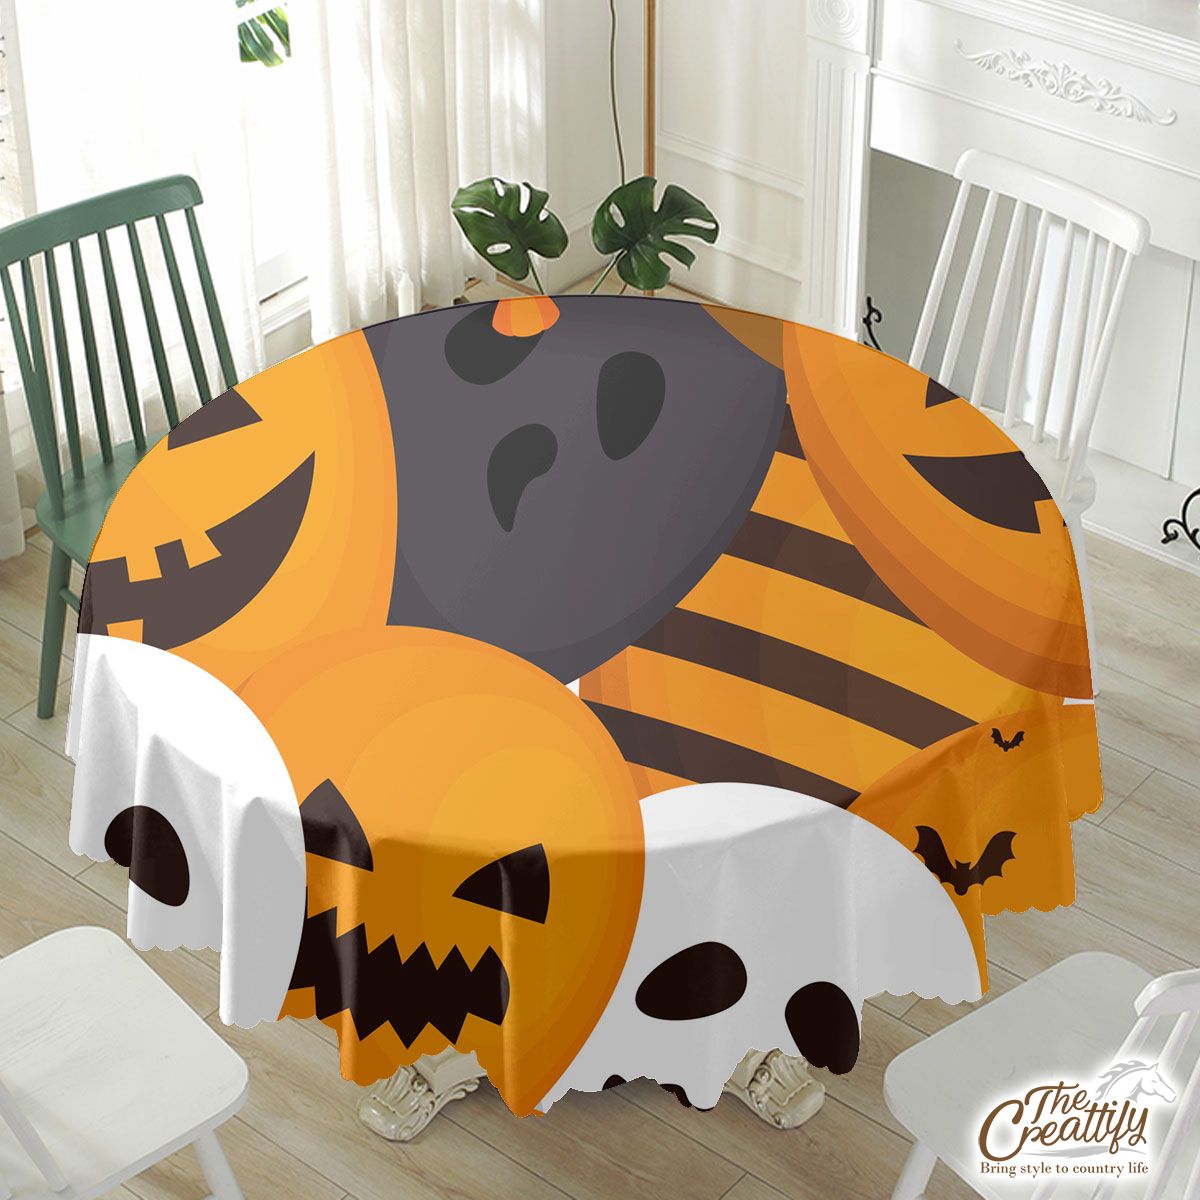 Halloween Balloons With Scary Faces Waterproof Tablecloth